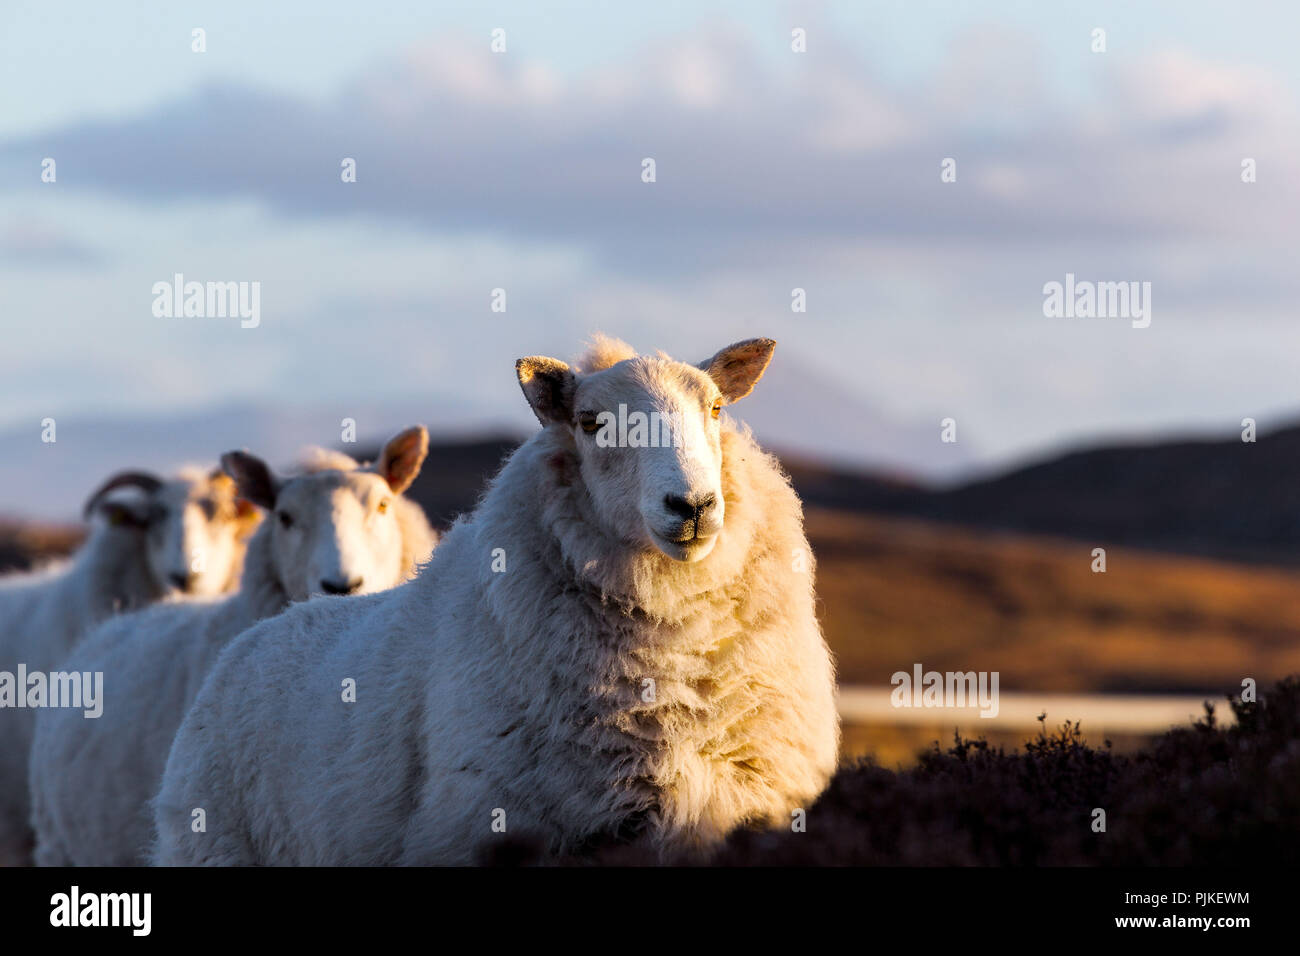 A few sheeps on the highway A836 in the scottish highlands Stock Photo